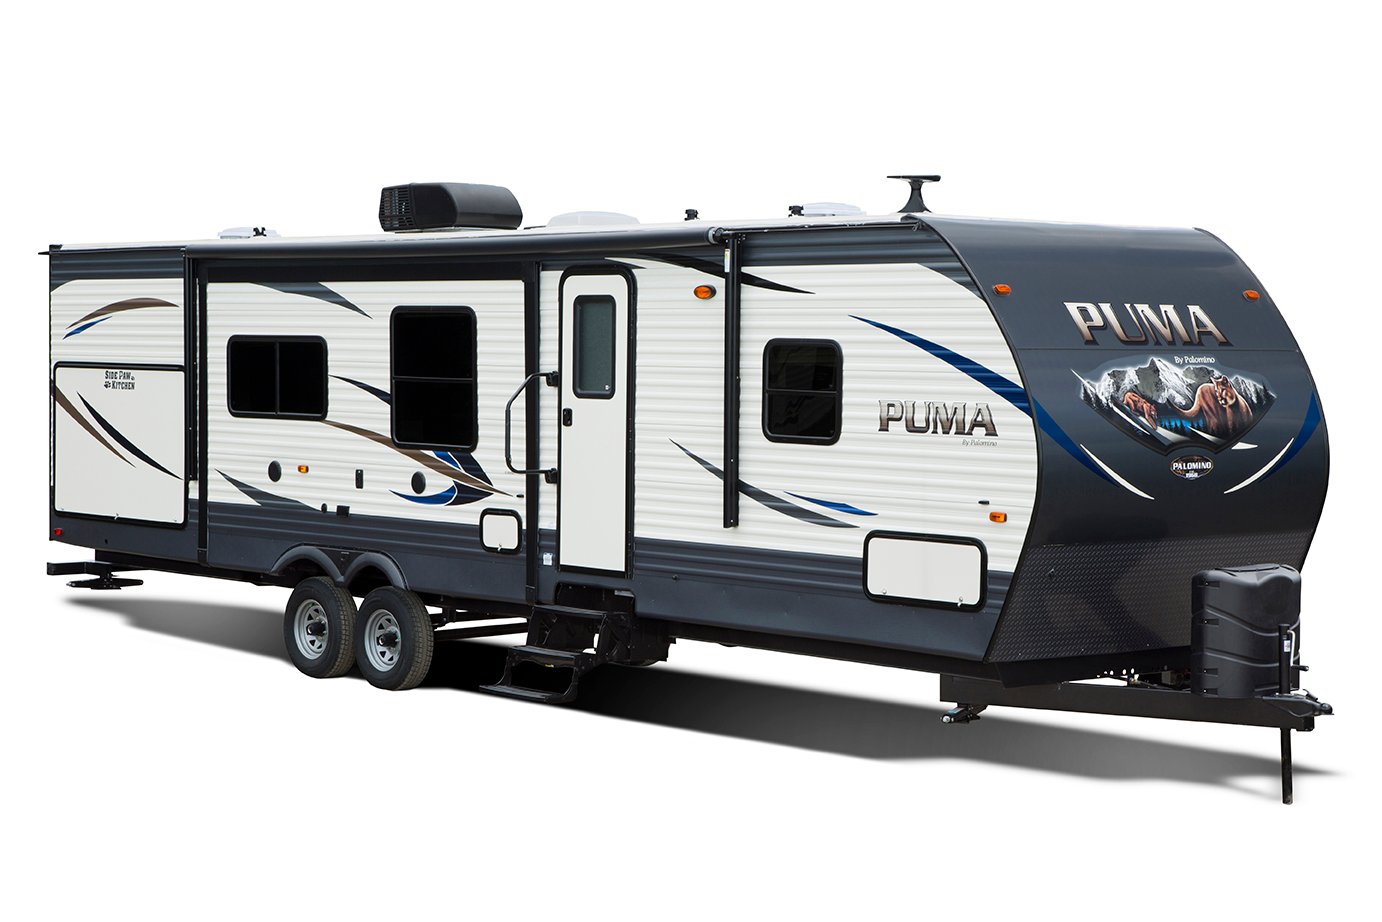 Top 5 Travel Trailers With King Beds